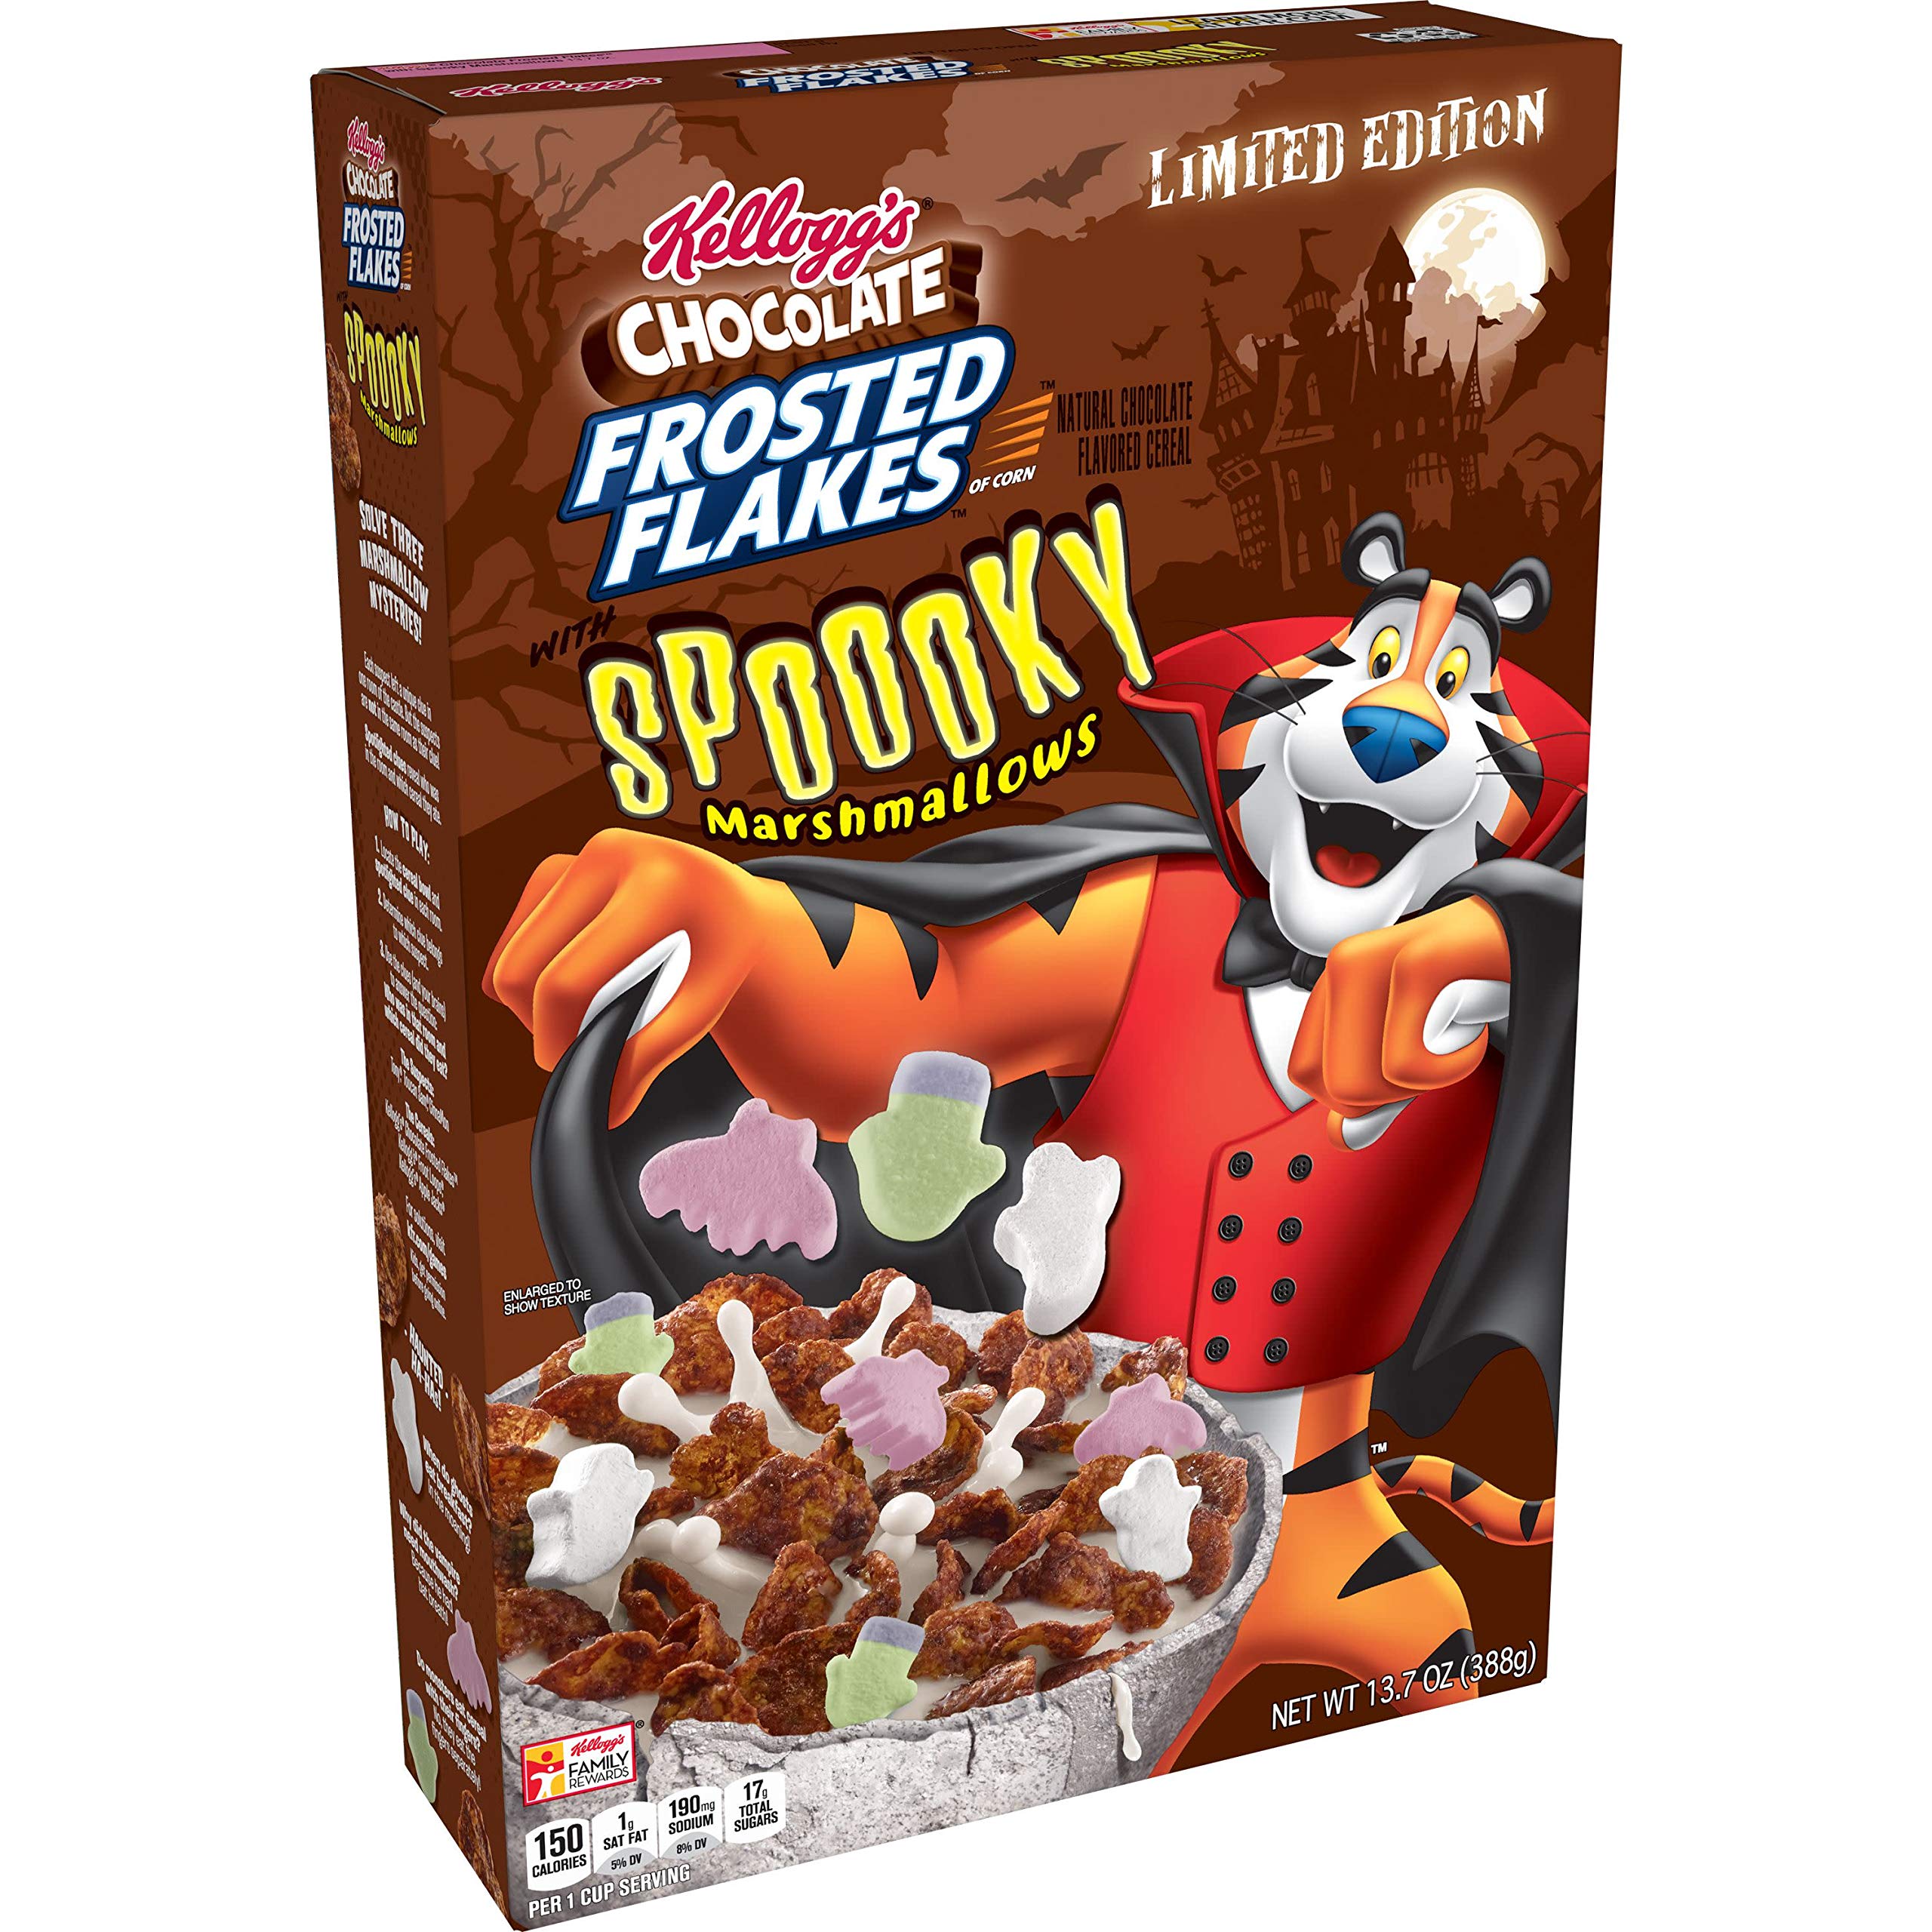 Frosted Flakes - Frosted Flakes, Cereal, Corn with Crispy Cinnamon Basket  Balls (10.2 oz), Shop